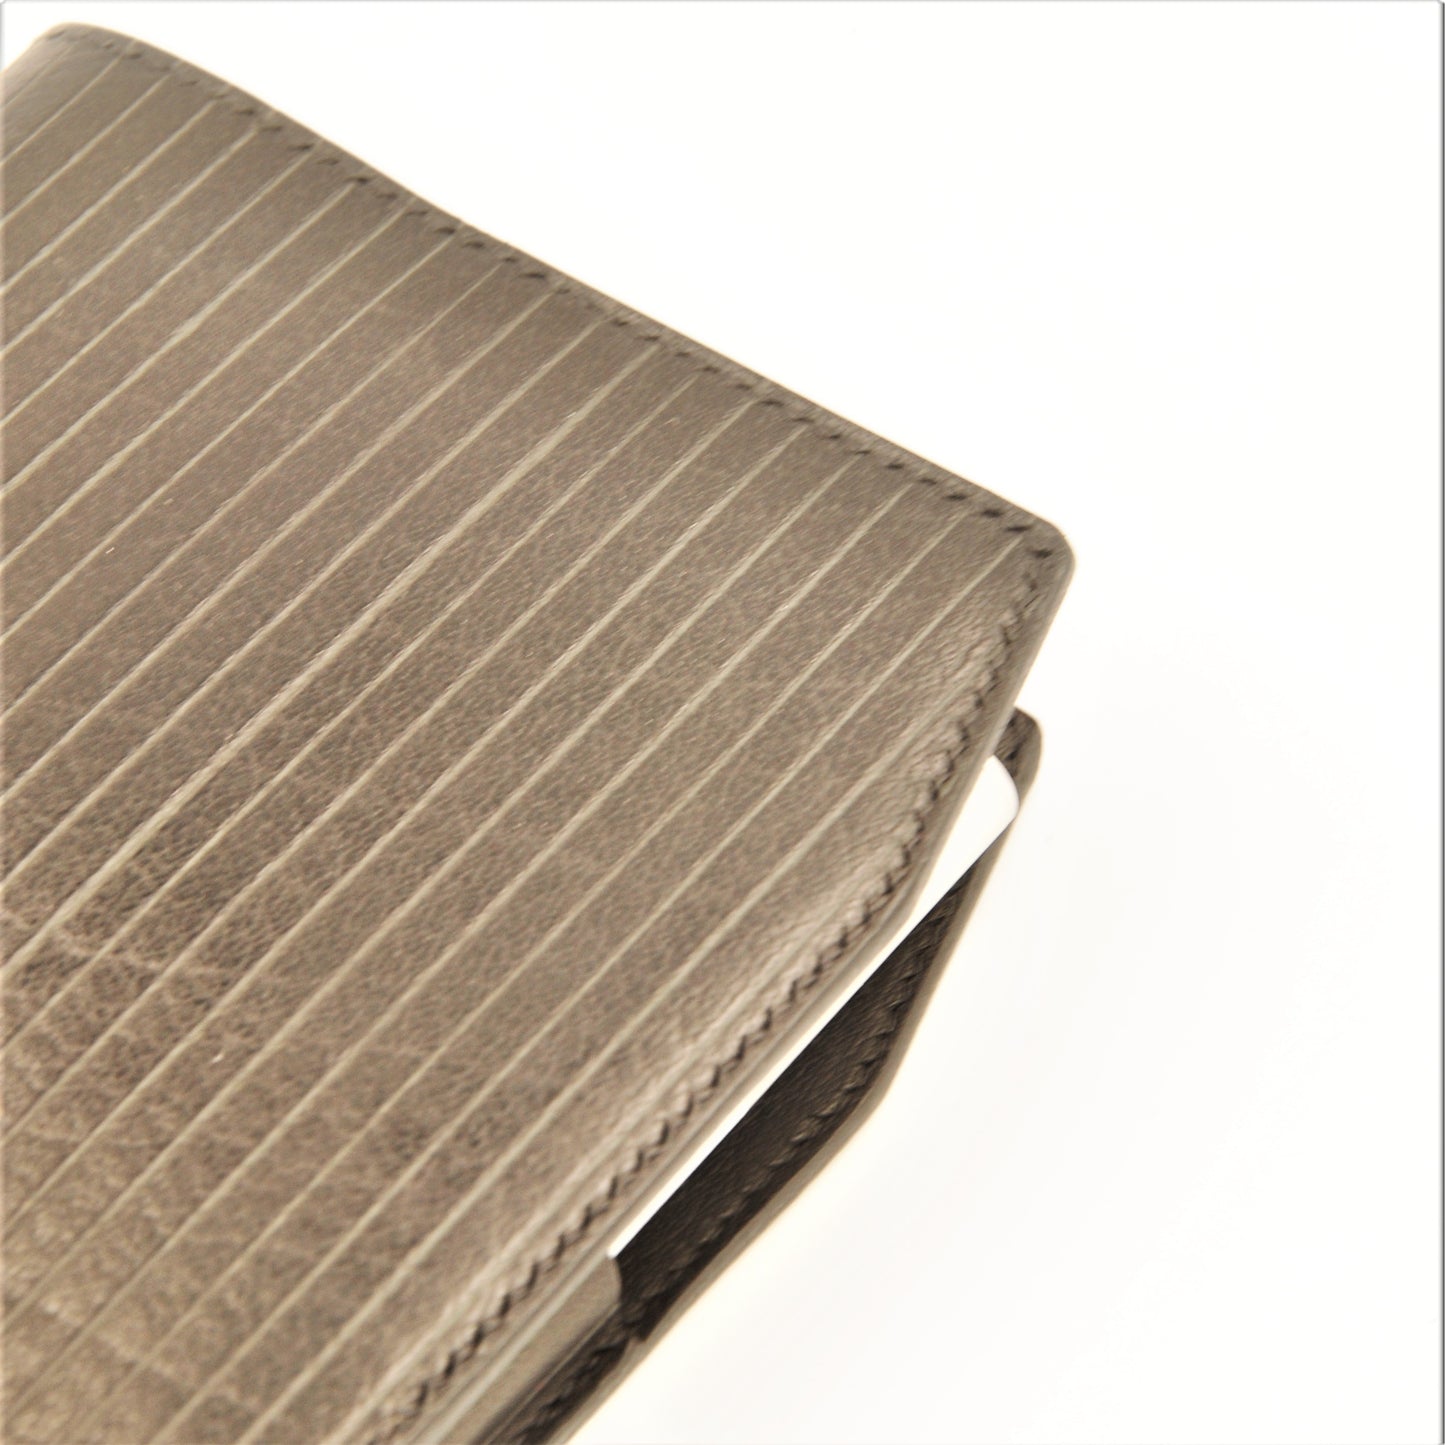 HANNOVER A6-P Notebook Sleeve